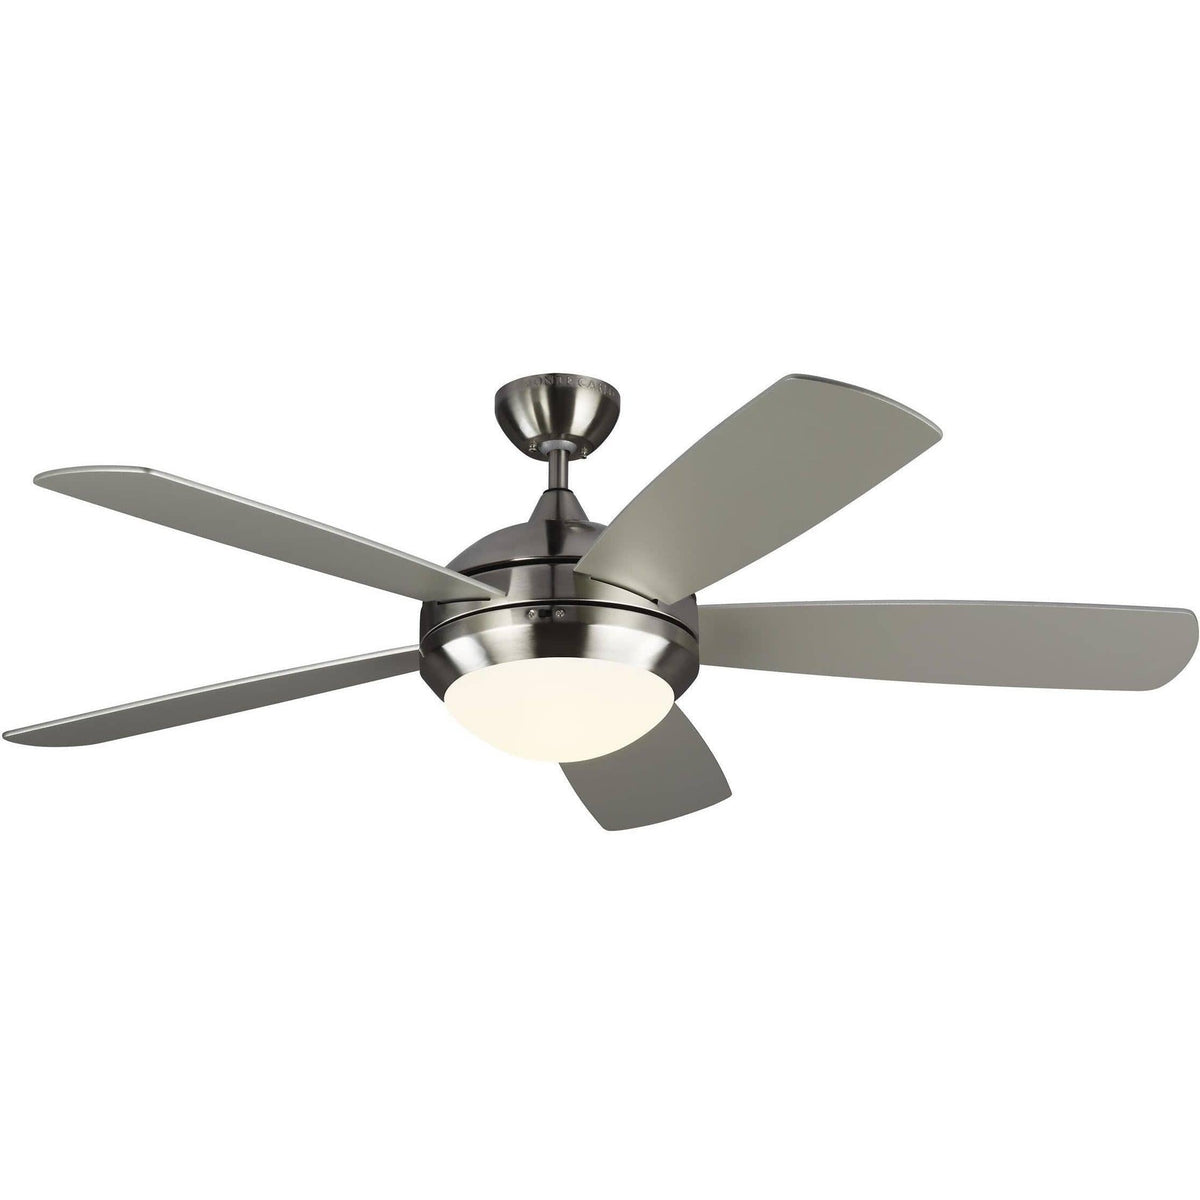 Visual Comfort Fan Collection - Discus Classic Smart 52" Ceiling Fan - 5DISM52BSD | Montreal Lighting & Hardware